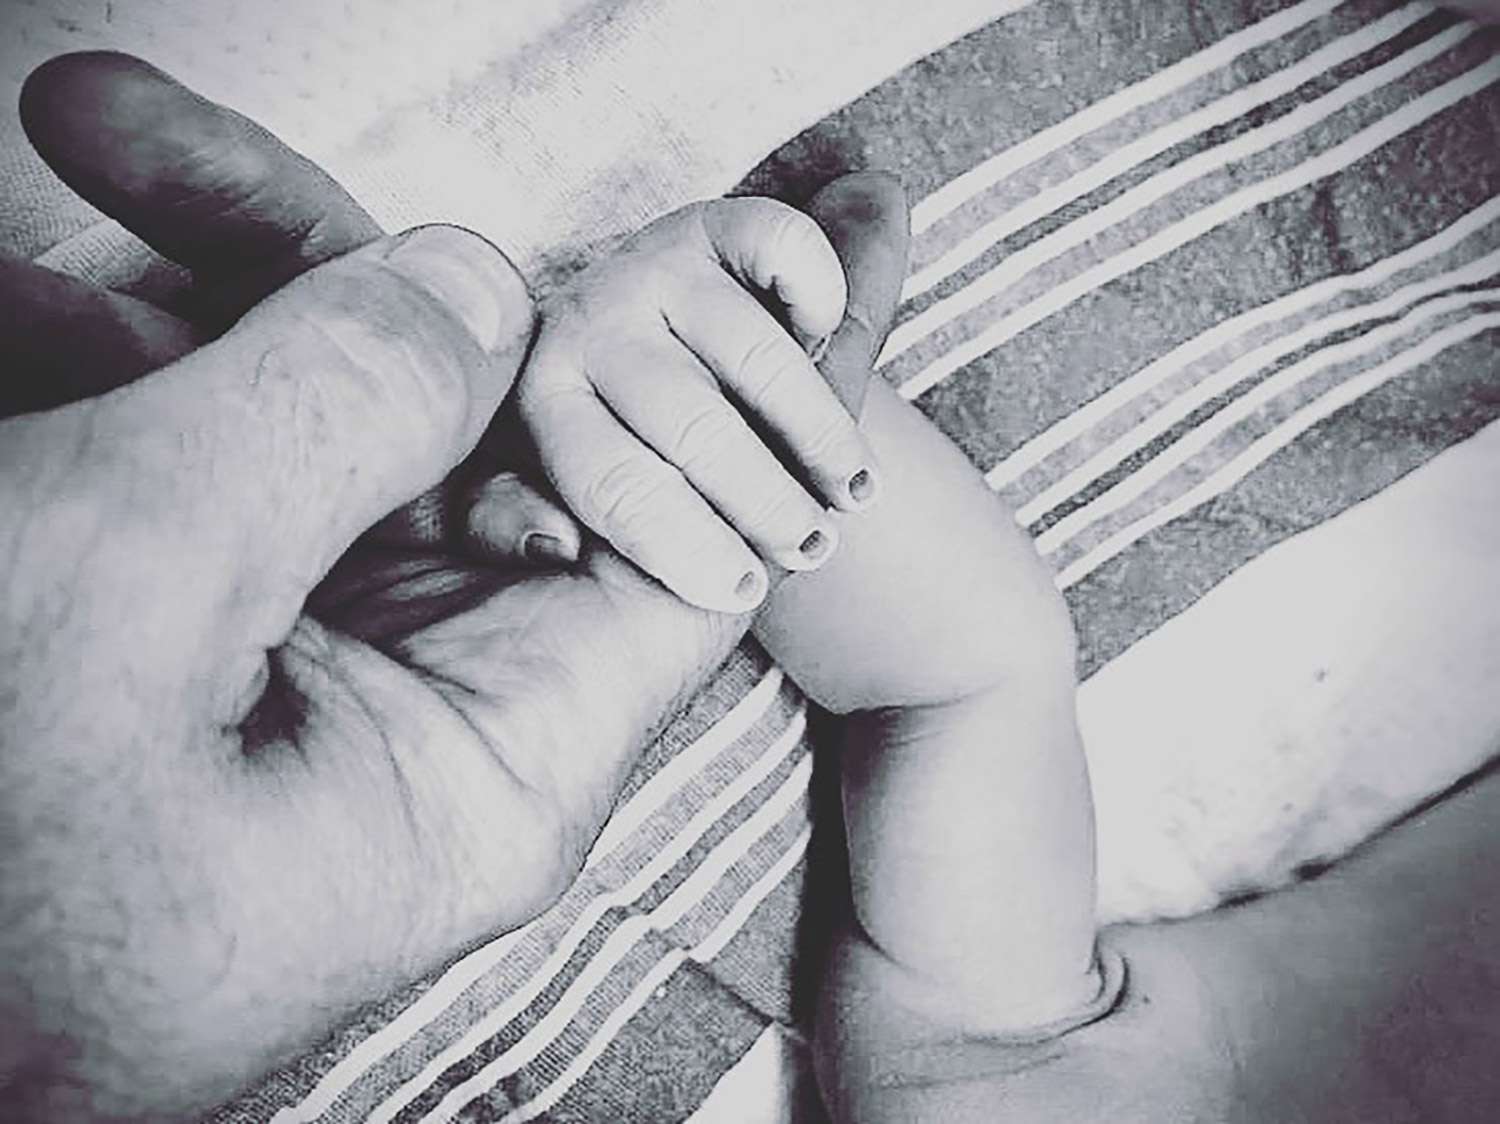 https://www.instagram.com/p/CfcsCTwPHC2/?hl=en hed: Brian Austin Green and Sharna Burgess Welcome Baby Boy